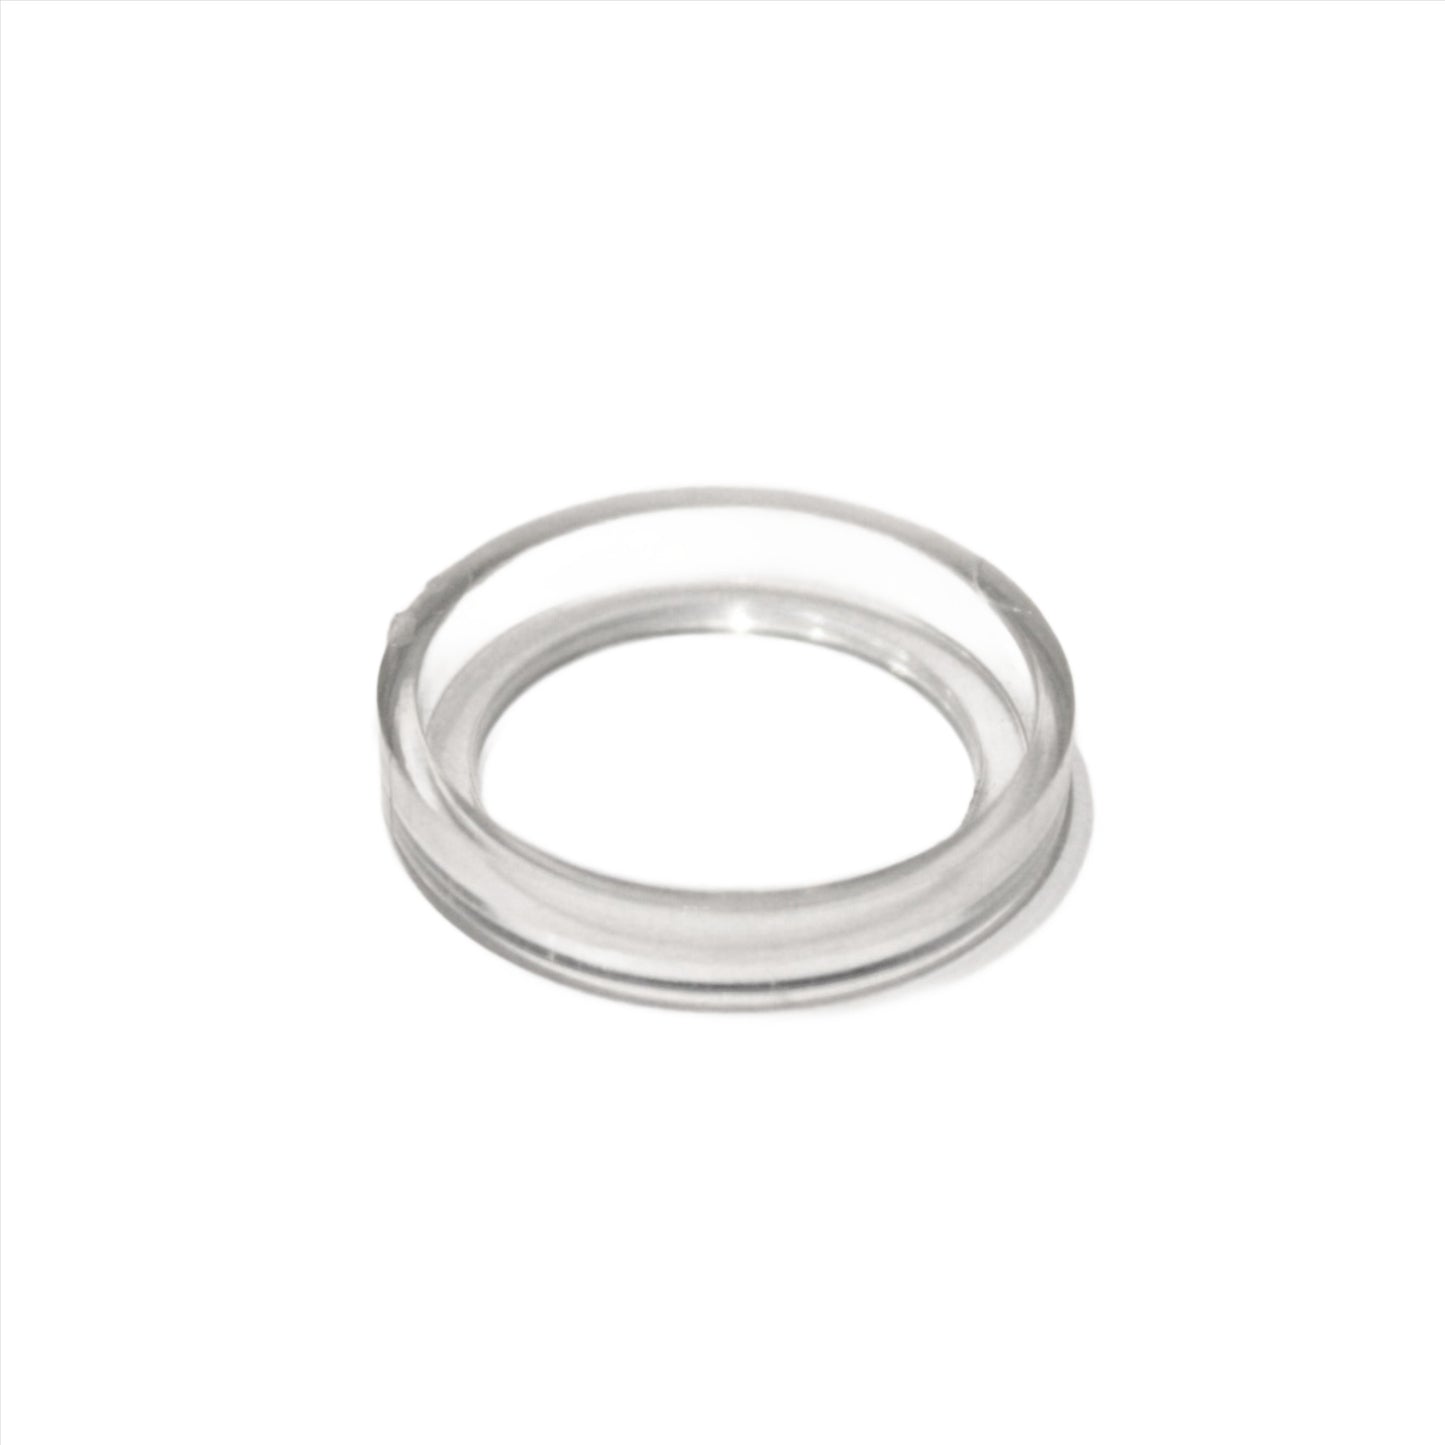 1" Plastic Check Ring, 3/4" Center Hole